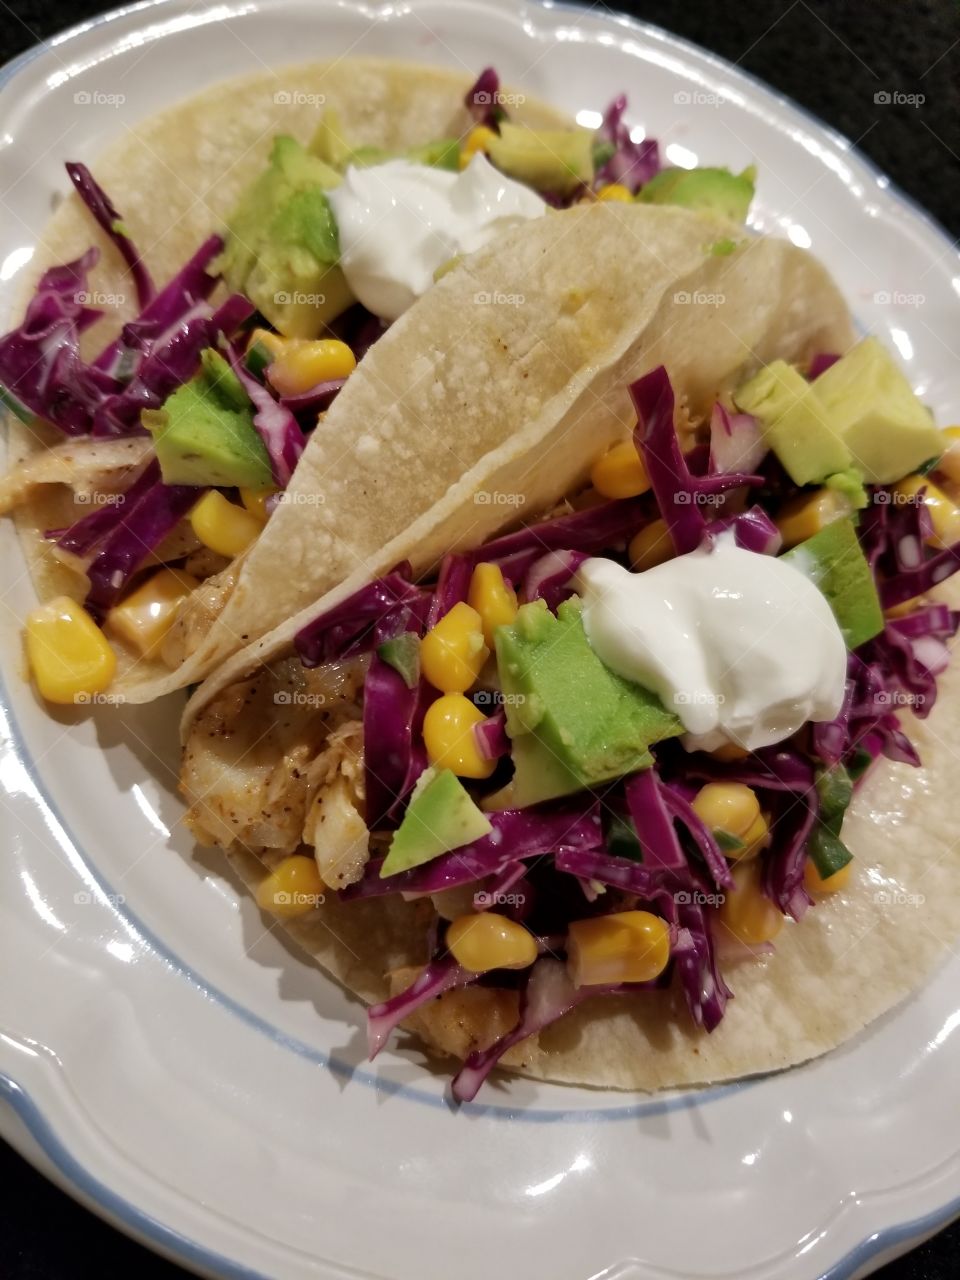 Fish Tacos-great for snacking or mealtime